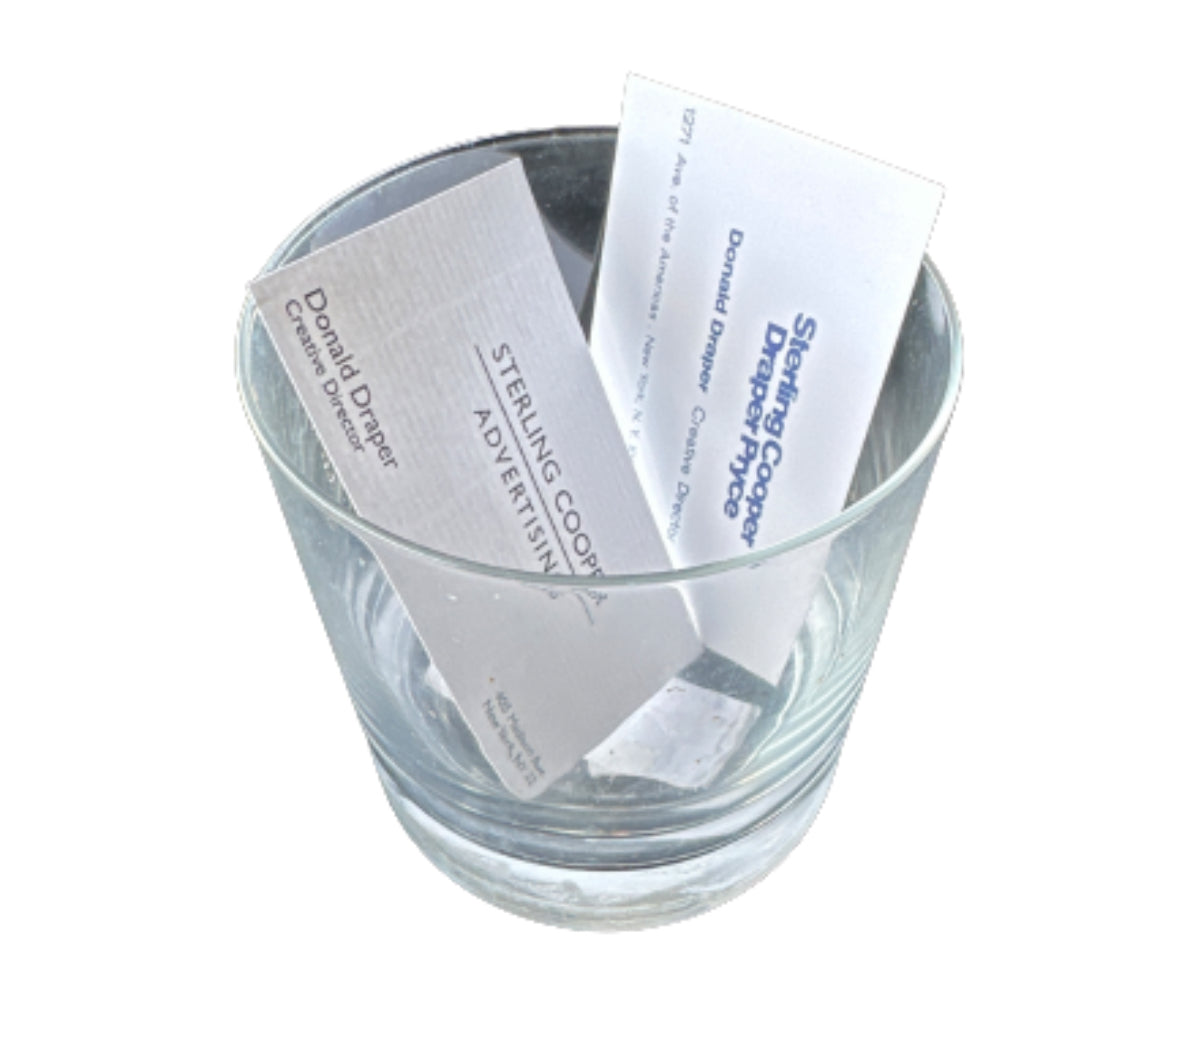 MAD MEN: Don Draper's Thick Bottom Vintage Whiskey Tumbler & Business Cards